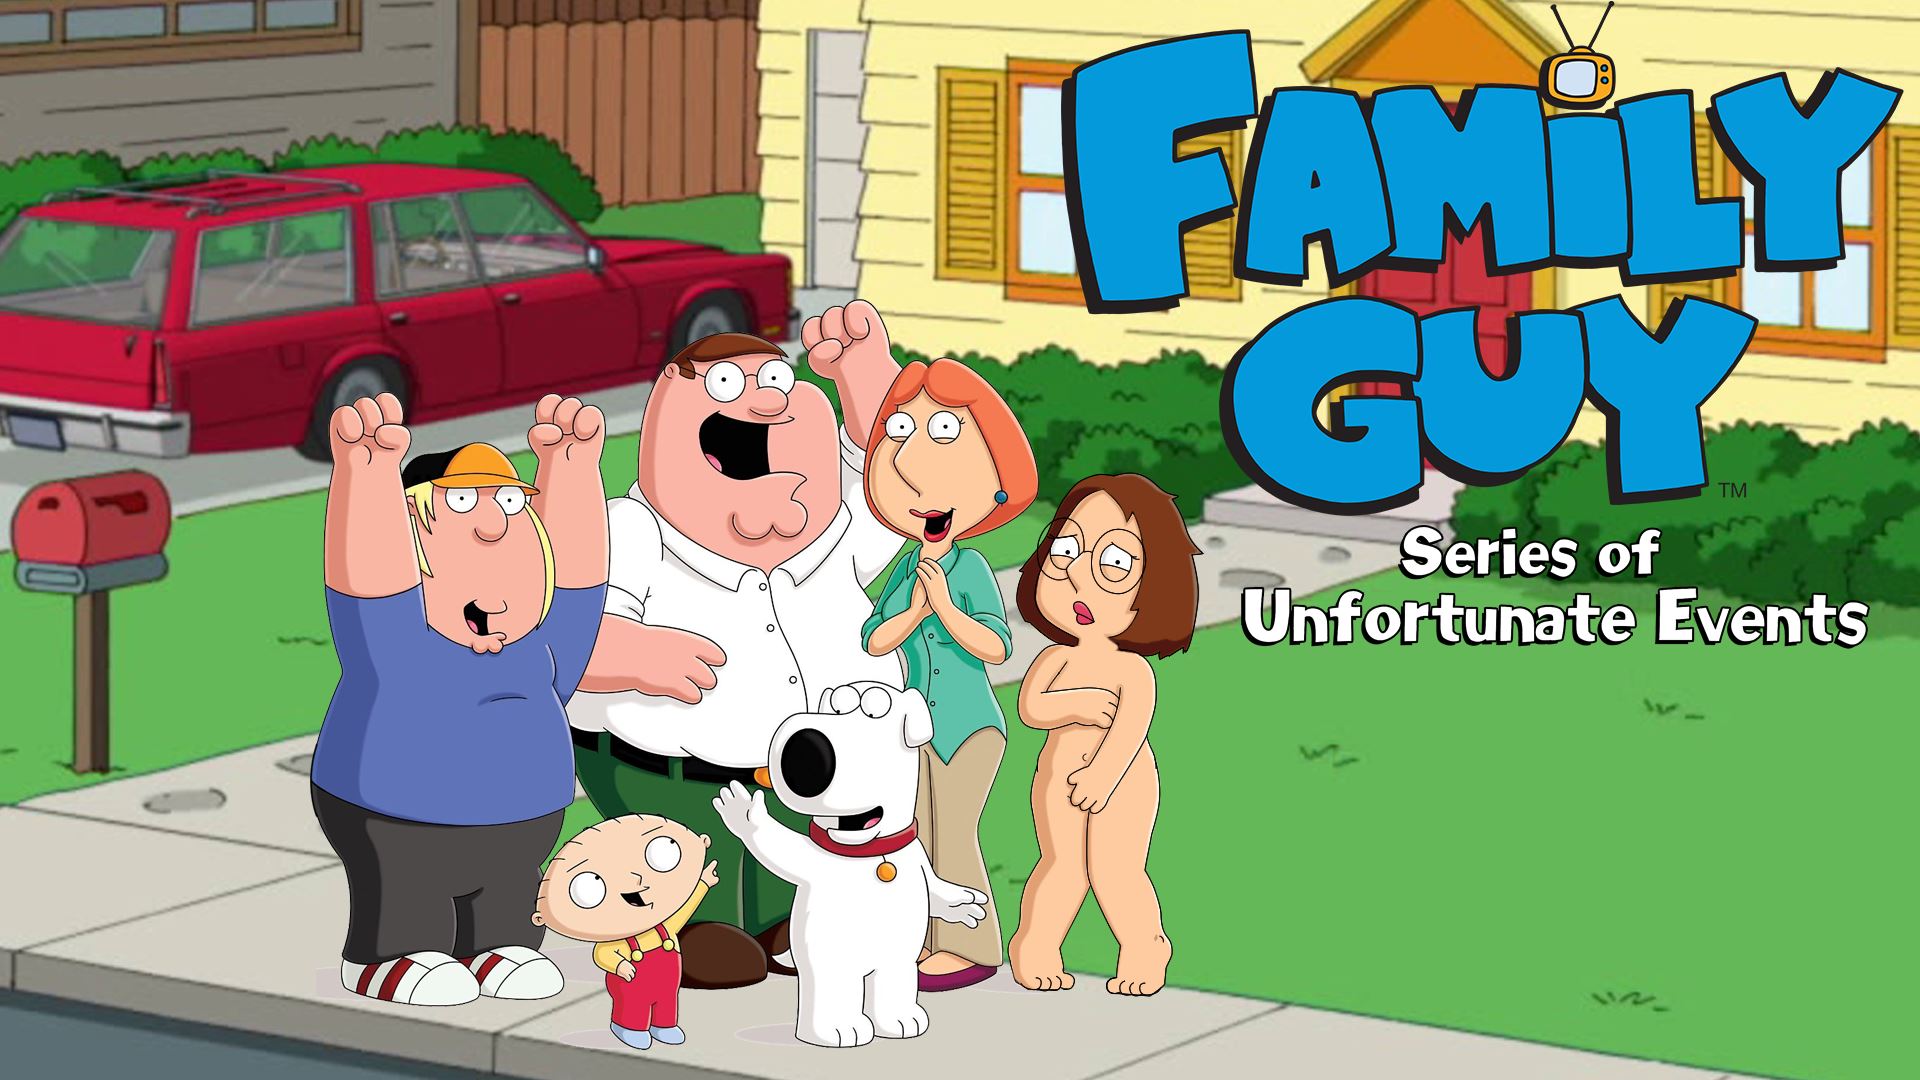 Hd Porn Unfortunately - Family Guy Series of Unfortunate Events Unity Porn Sex Game v.0.0.3 Alpha  Download for Windows, MacOS, Linux